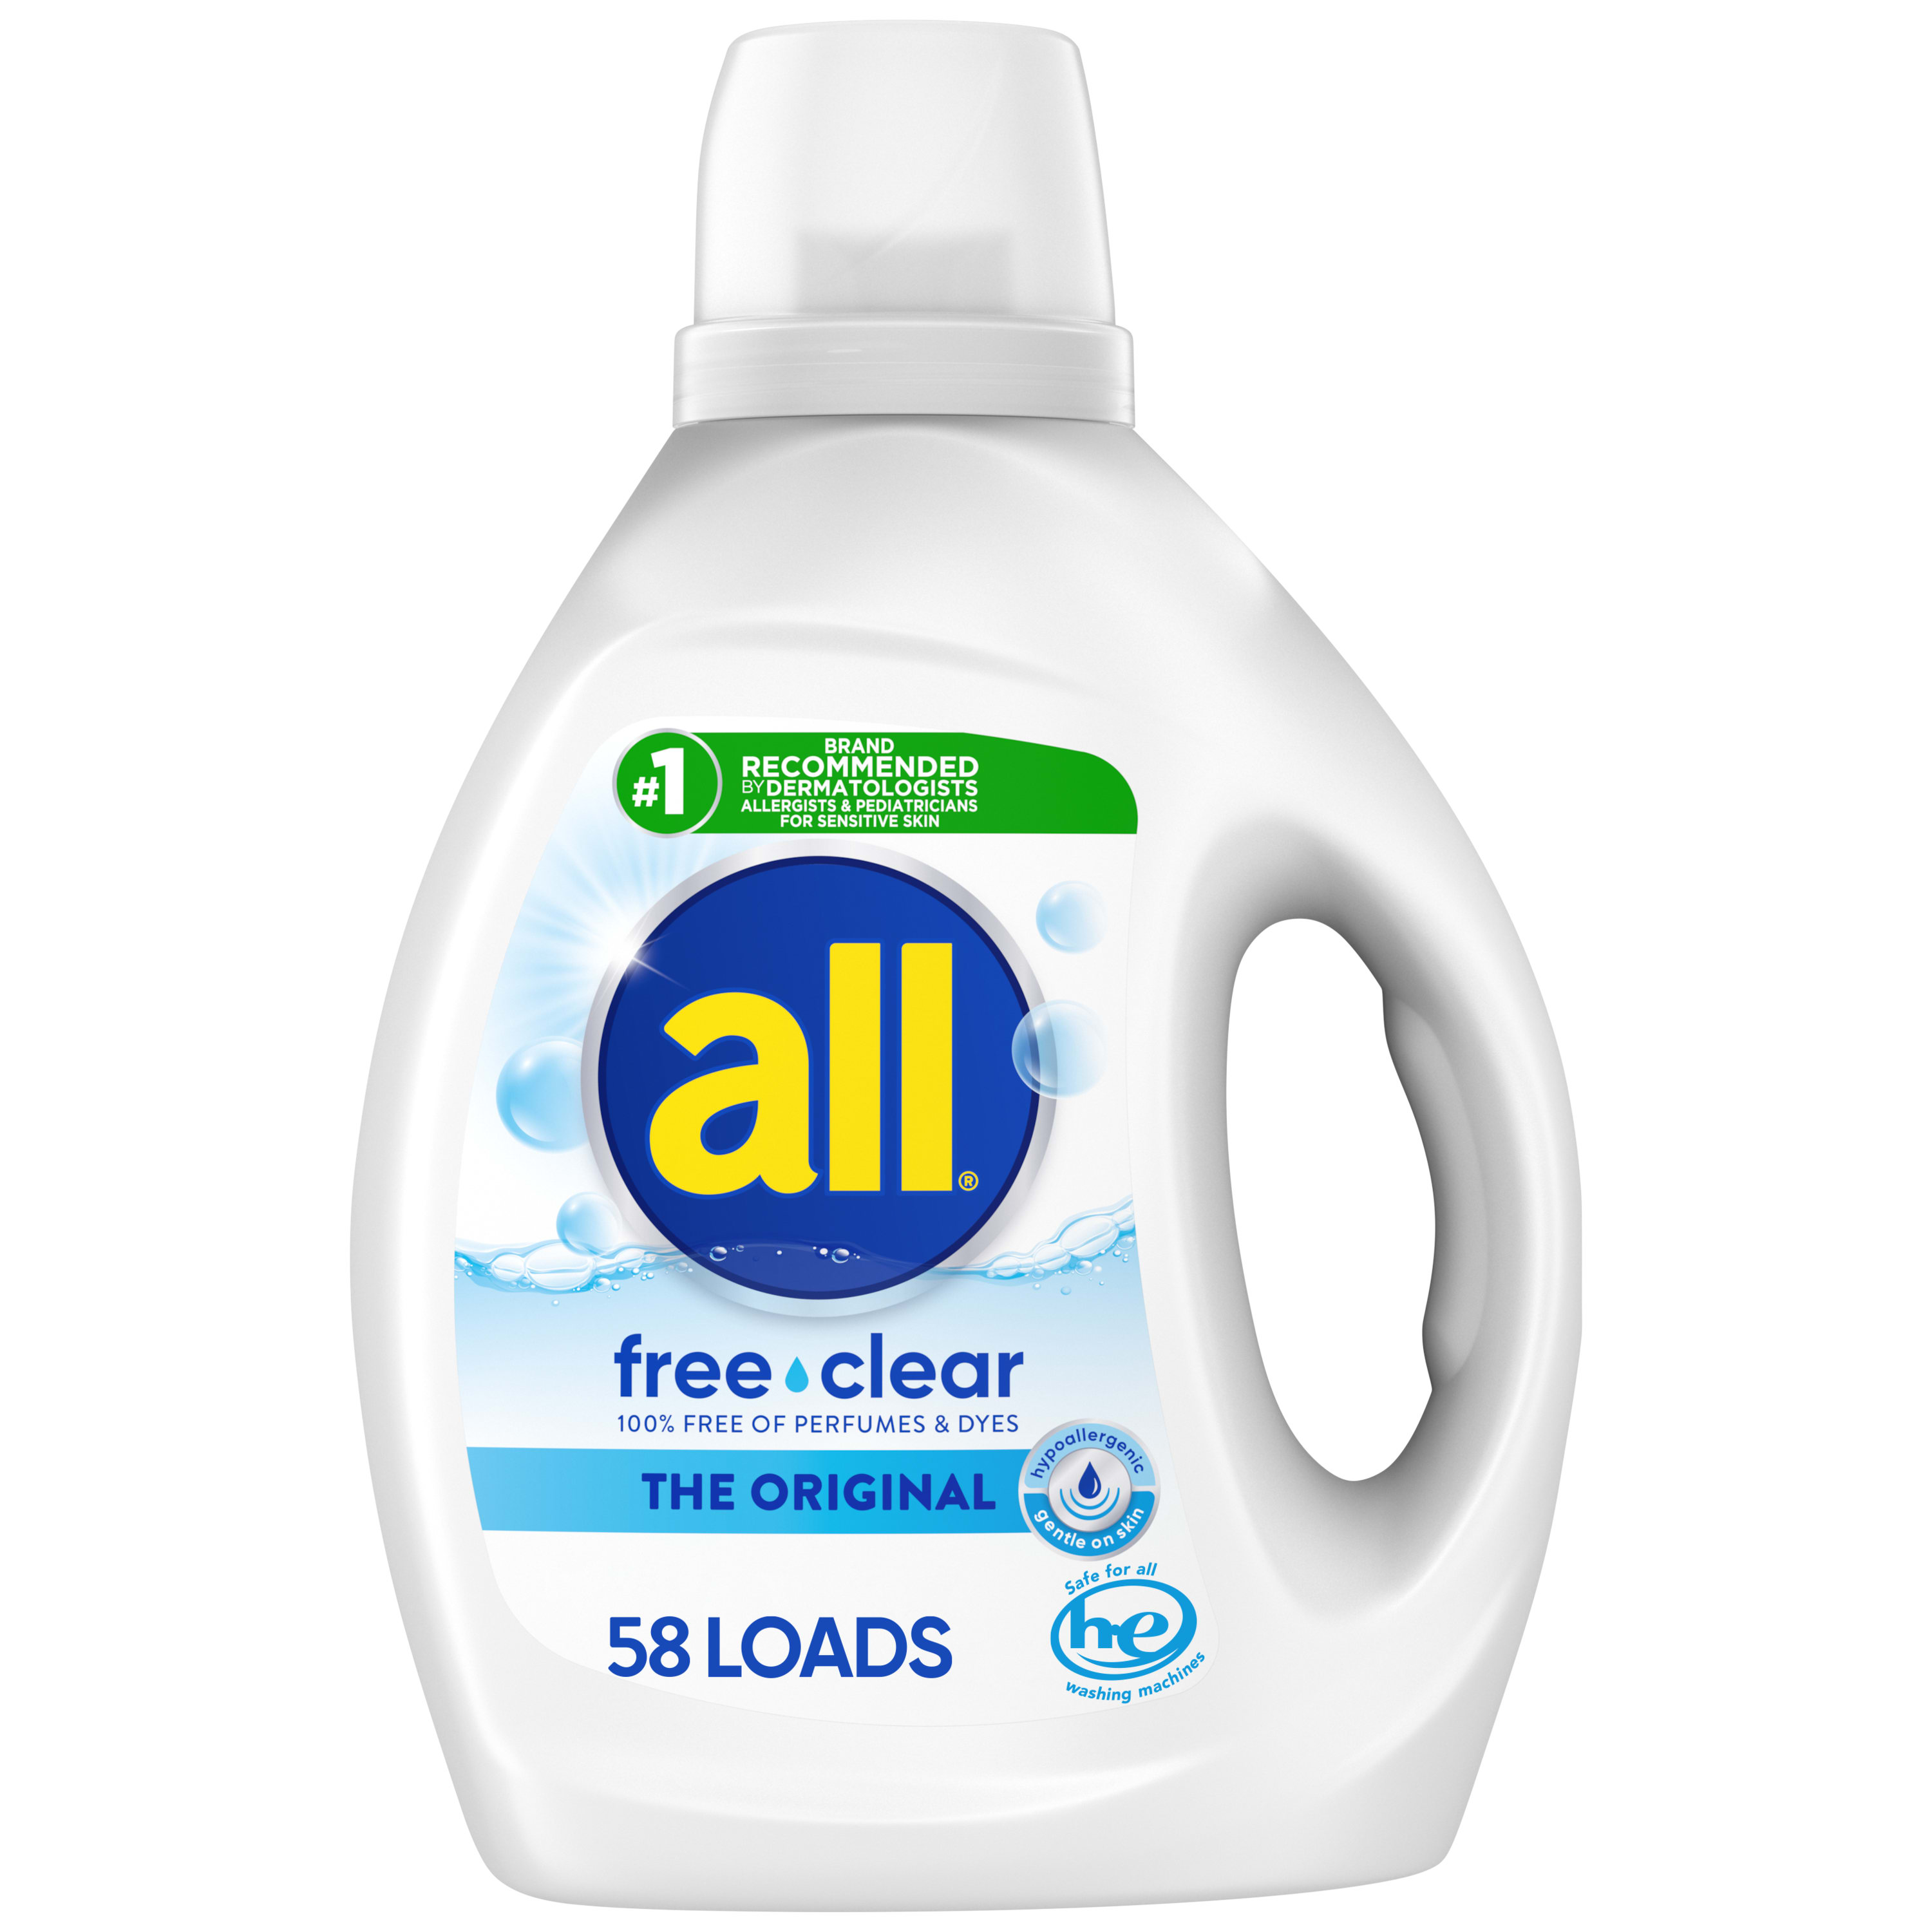 all Liquid Laundry Detergent, Free Clear for Sensitive Skin, 88 Fluid Ounces, 58 Loads - image 1 of 9